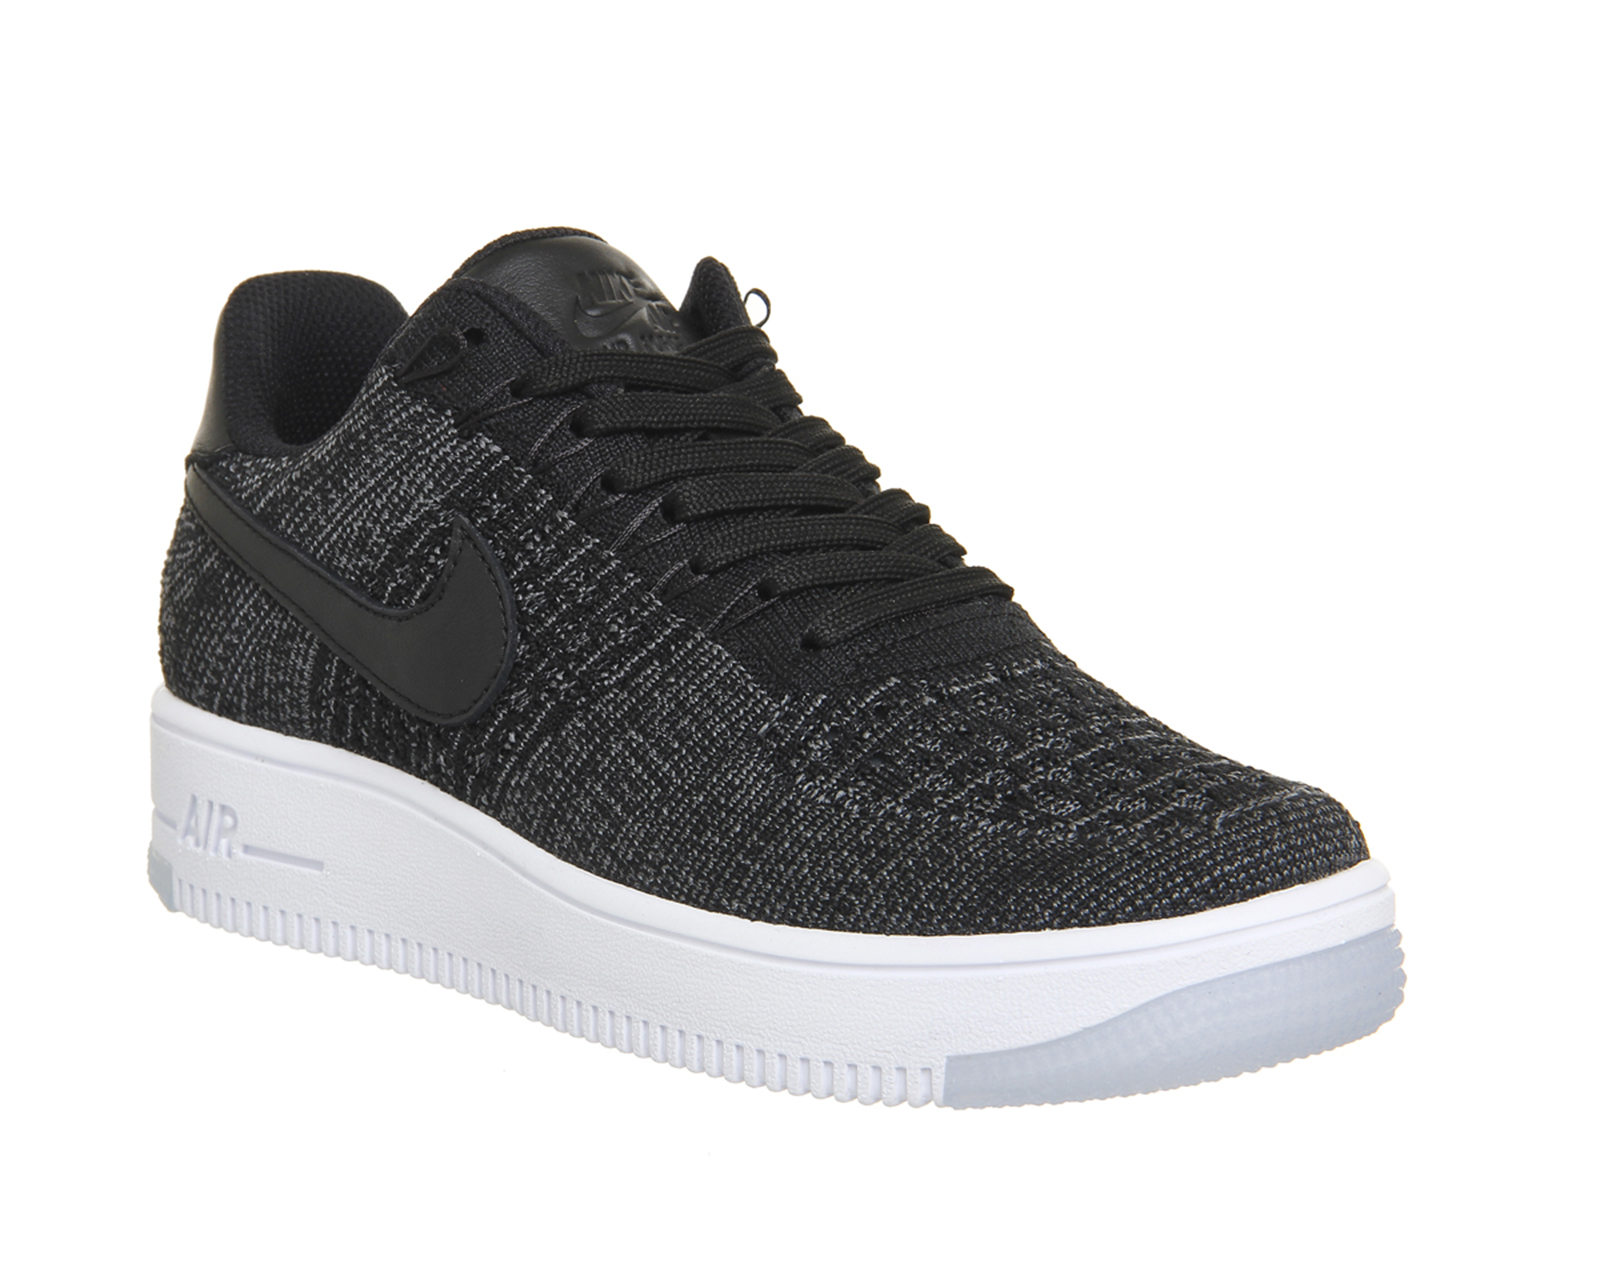 Nike Air Force 1 Low Flyknit W Black Black White - Hers trainers